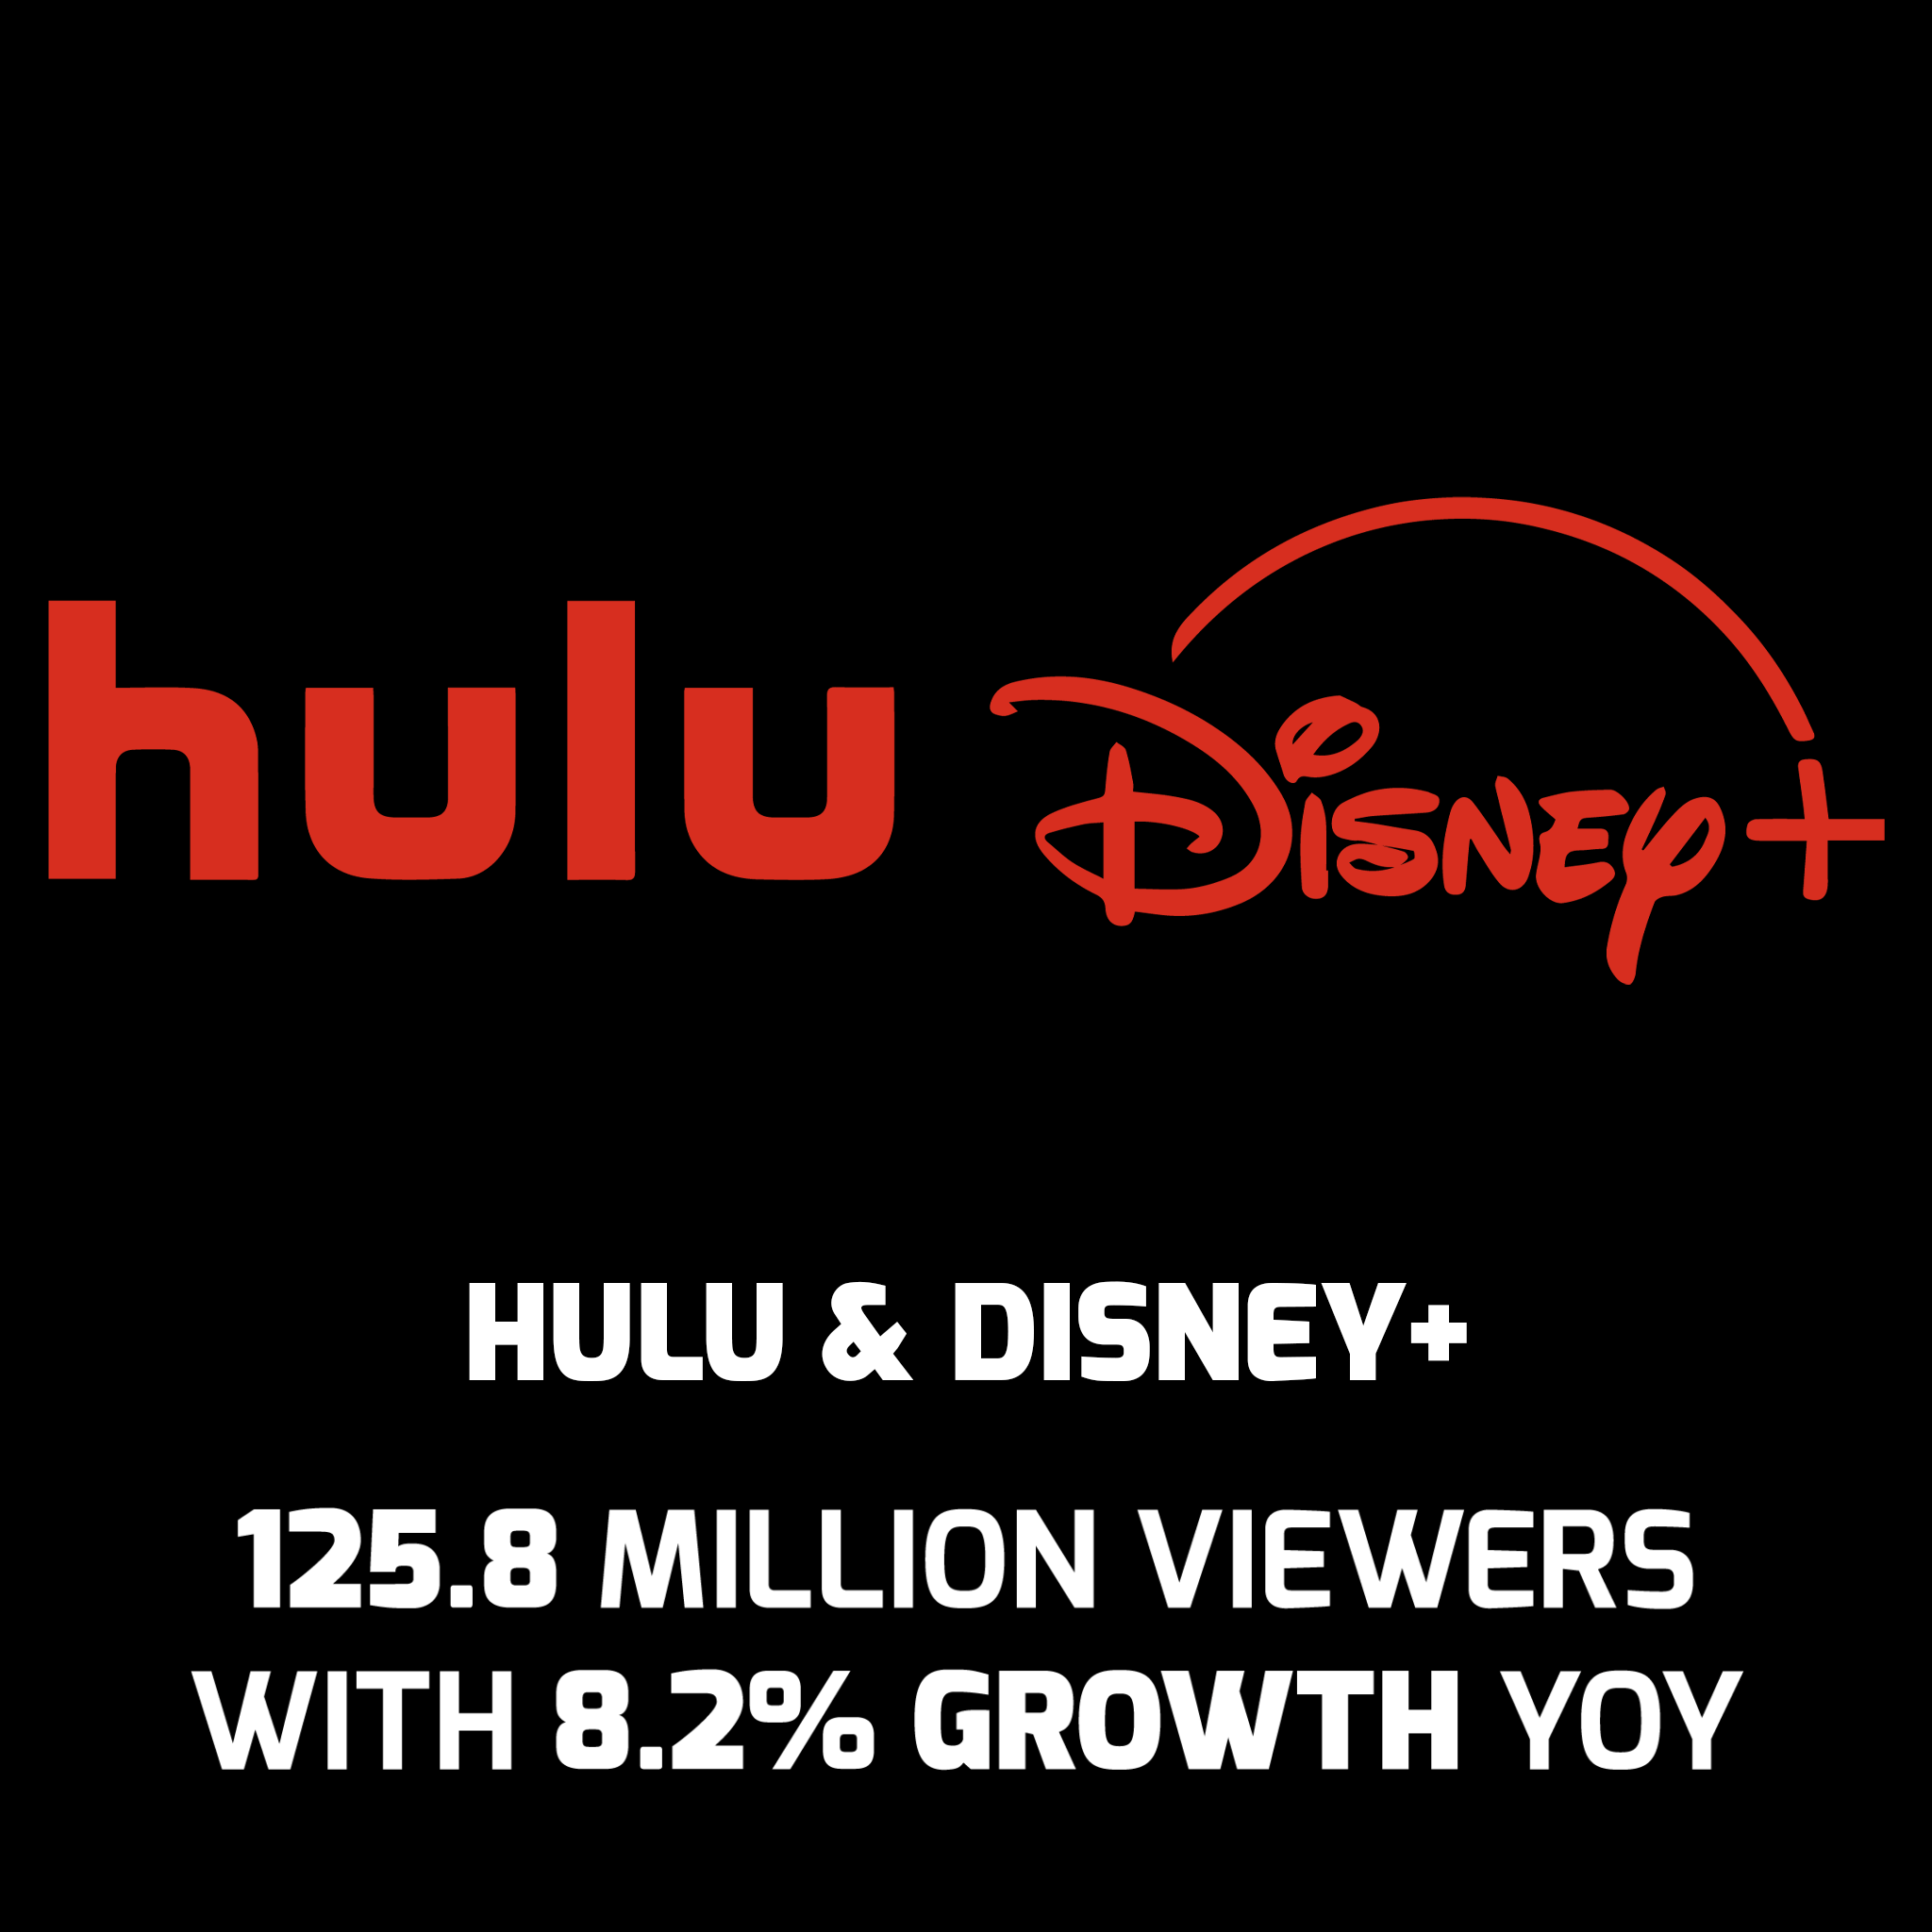 Hulu and Disney+ 125.8 million viewers with 8.2% growth year over year